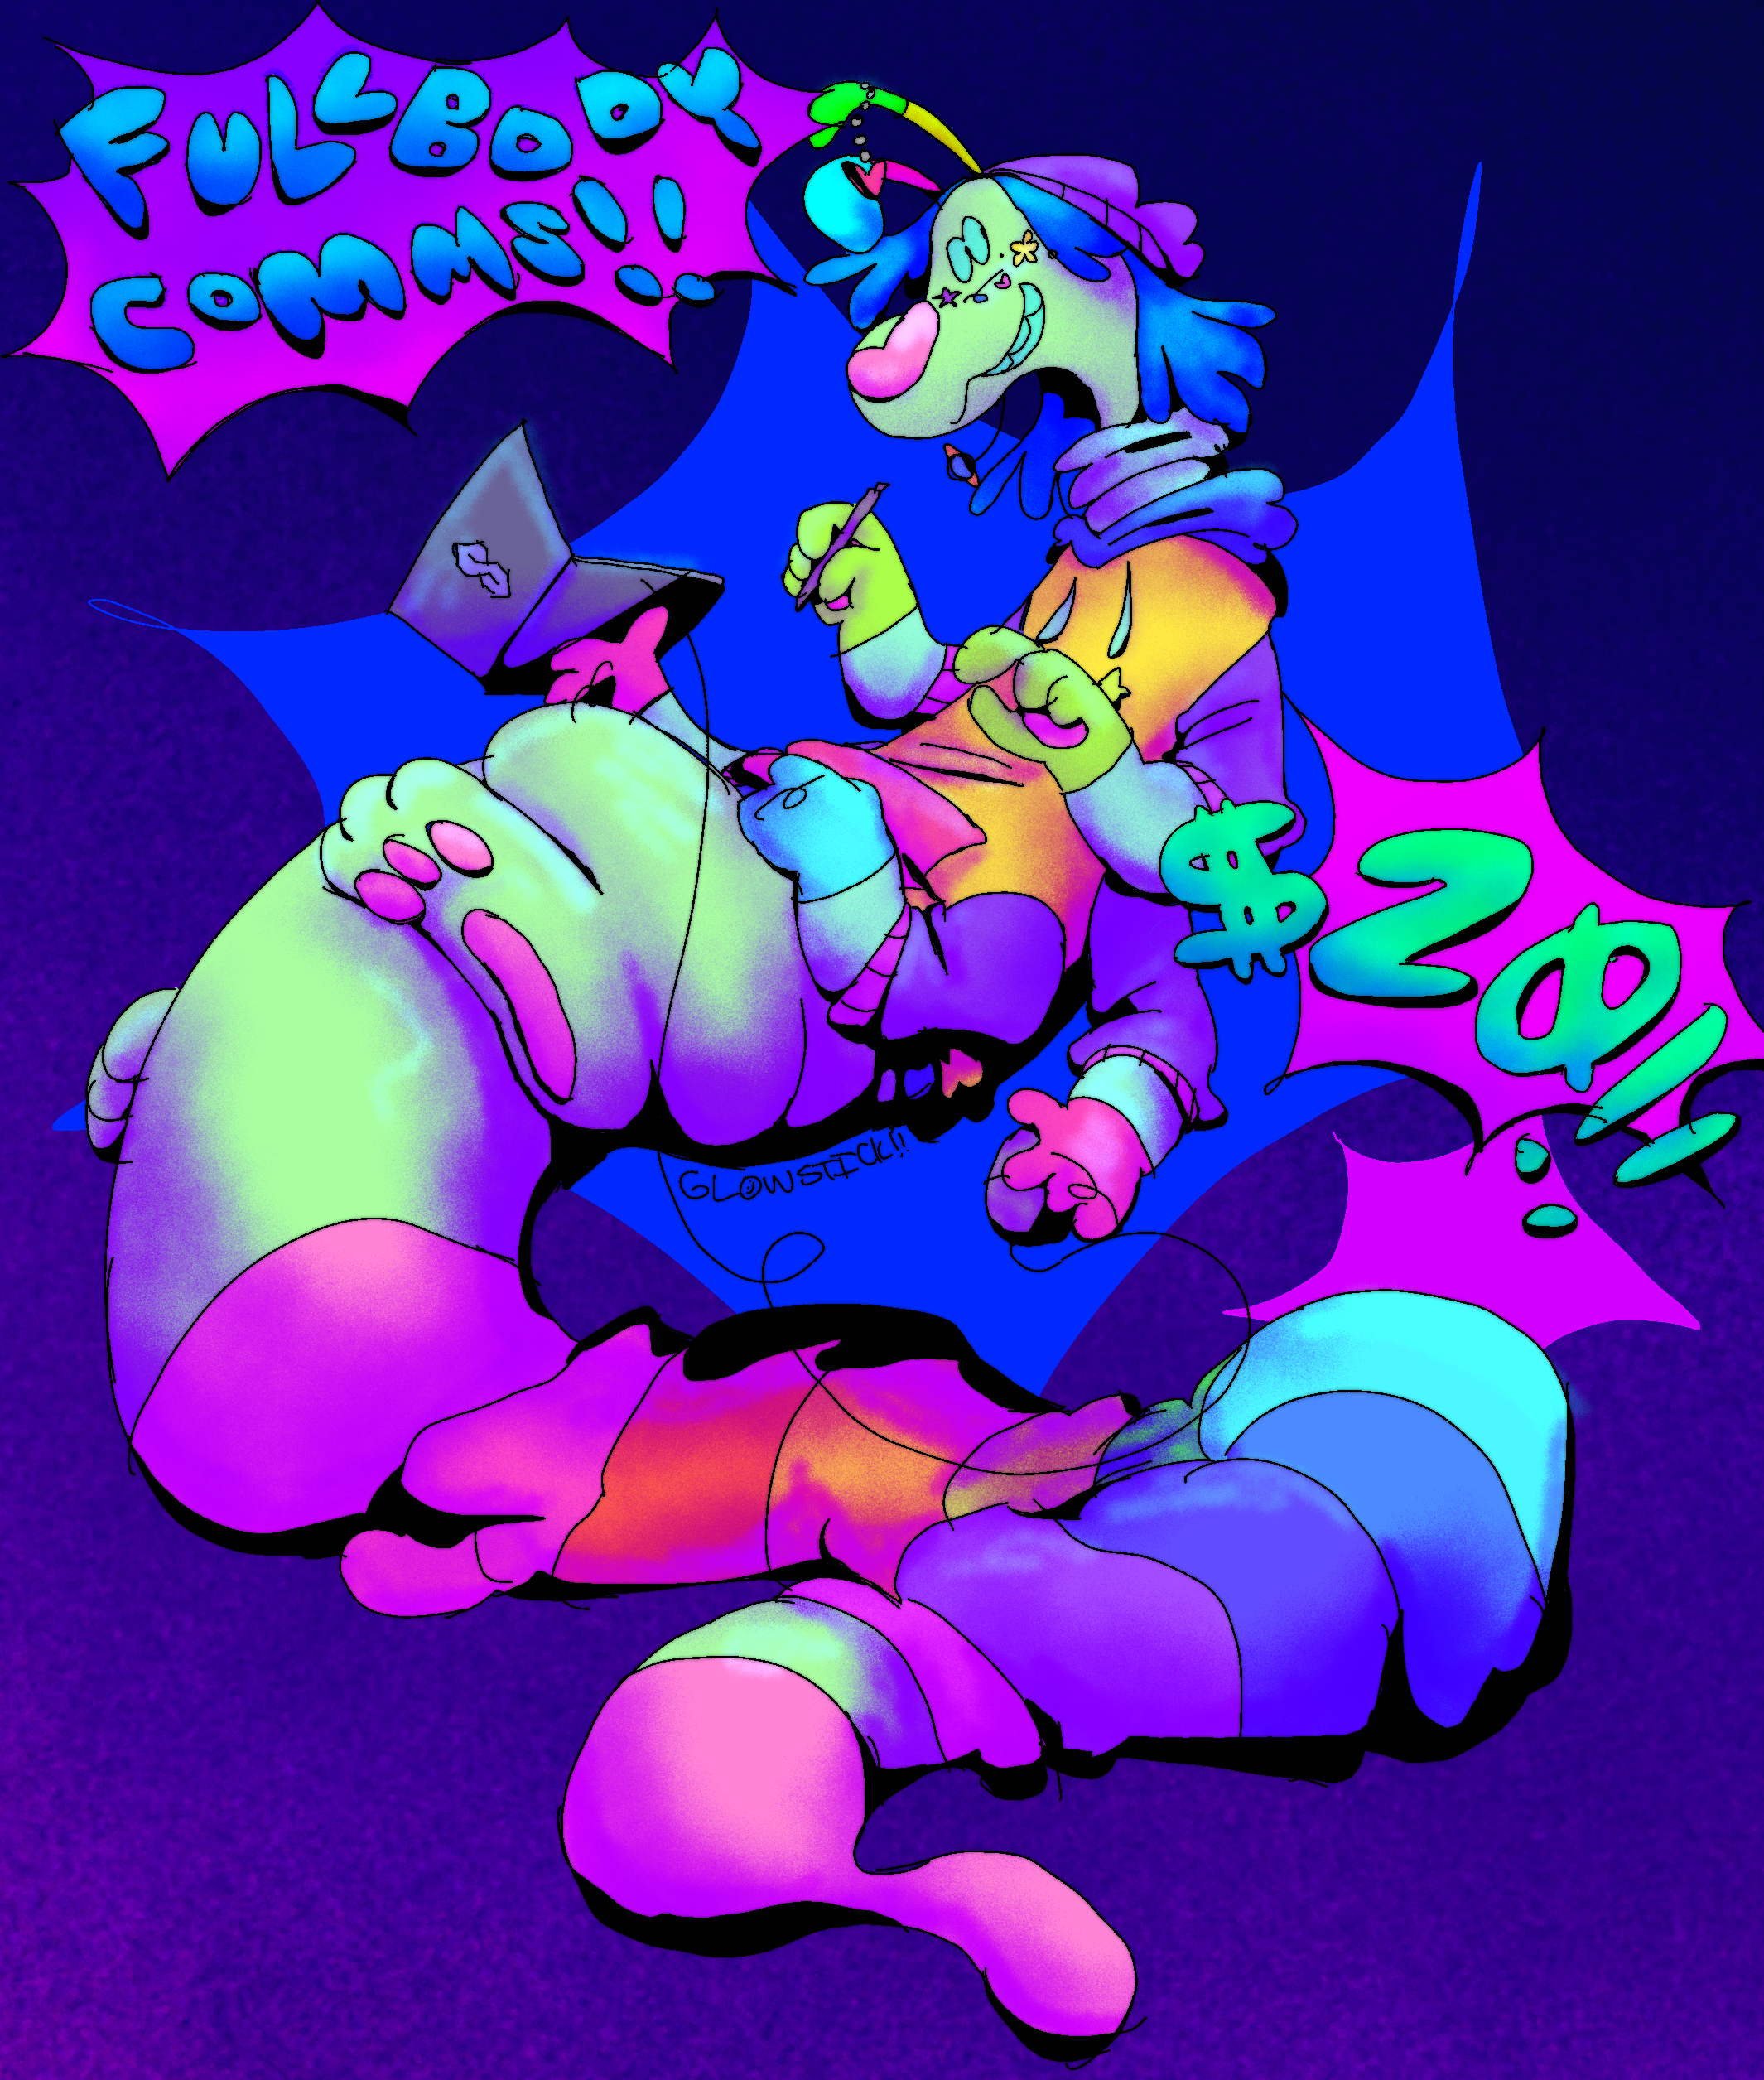 A colorful digital drawing of an anthropomorphic gummy worm character advertising $20 fullbody commissions.